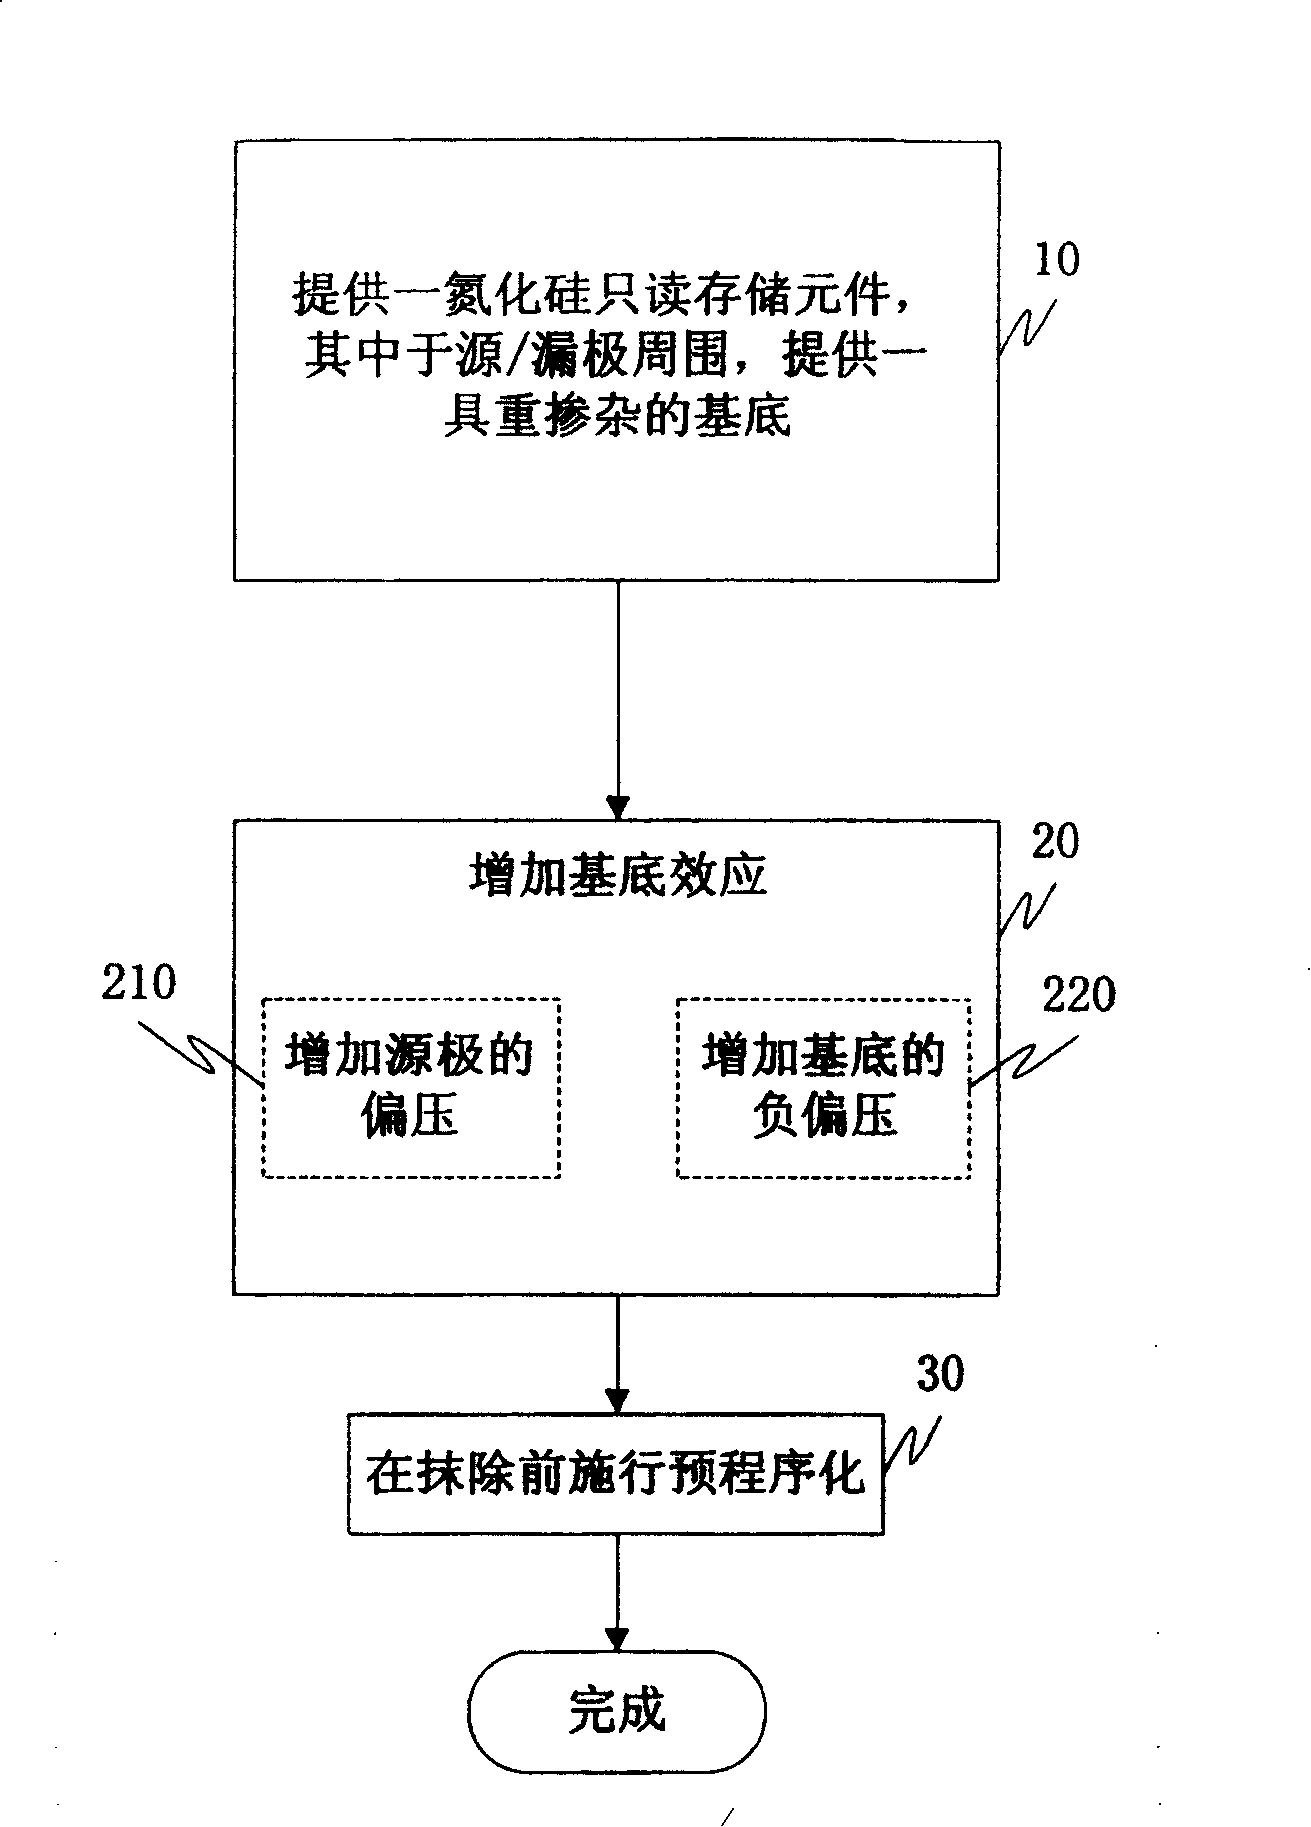 Operation method of silion nitride read-only memory element